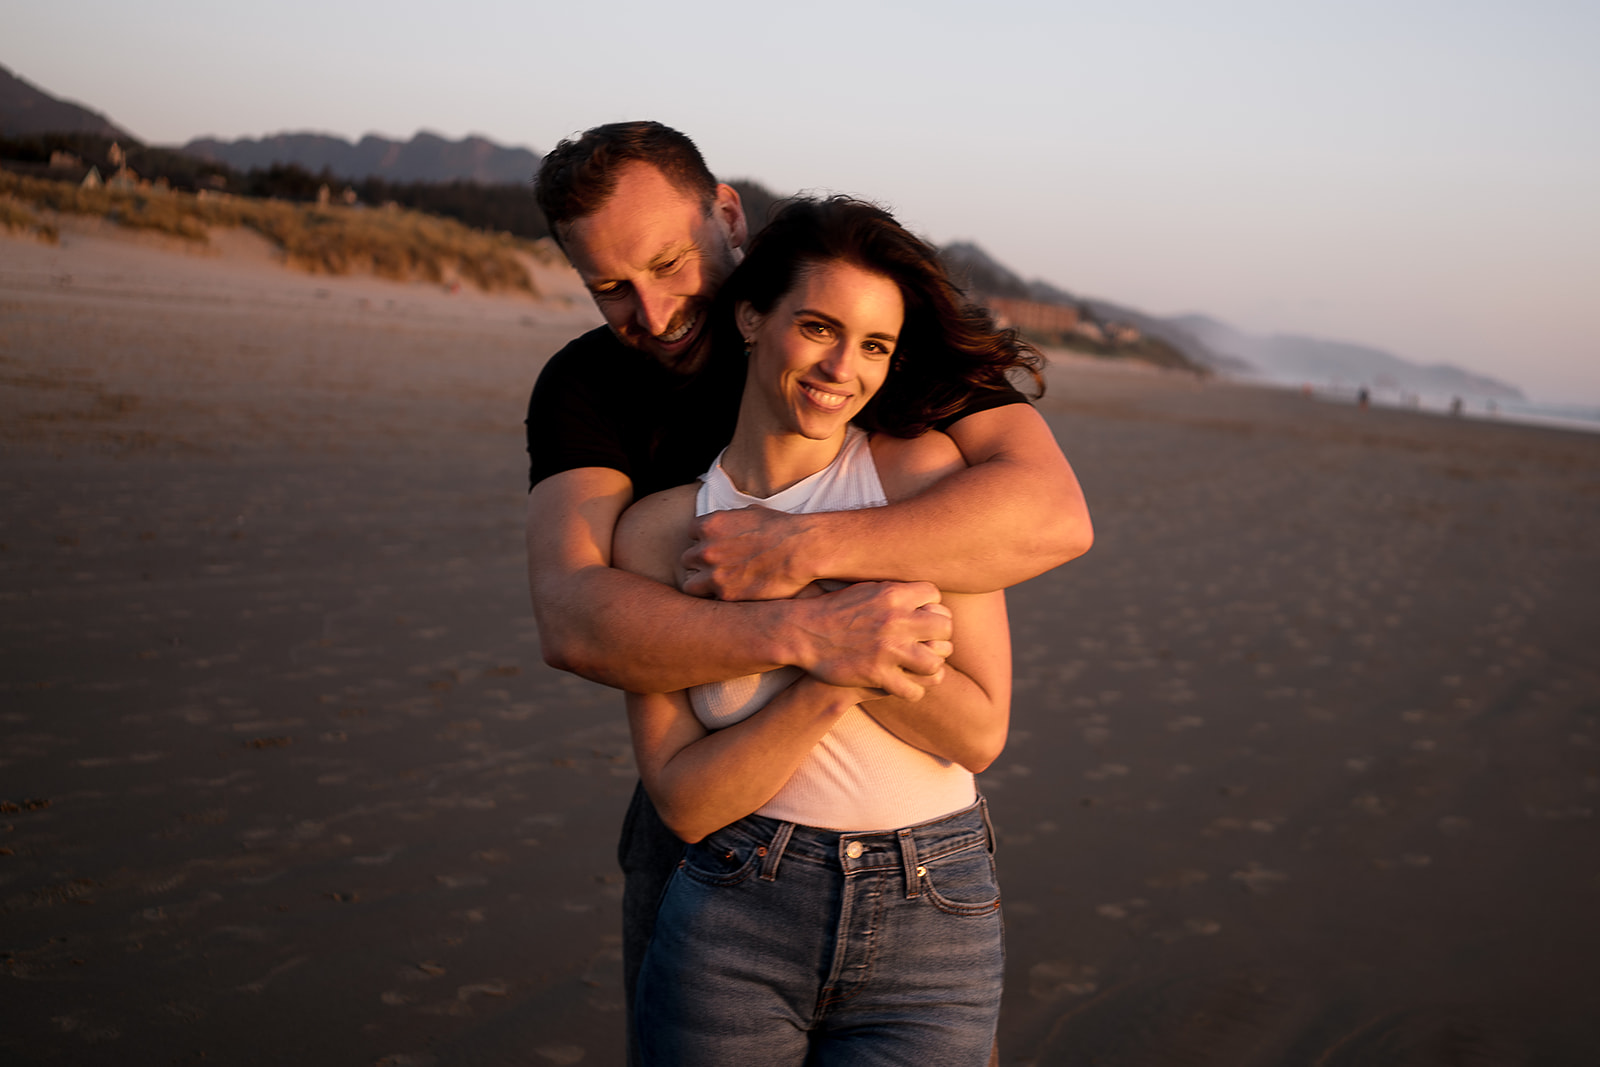 Cannon Beach Engagement session were the couple embraces with each other